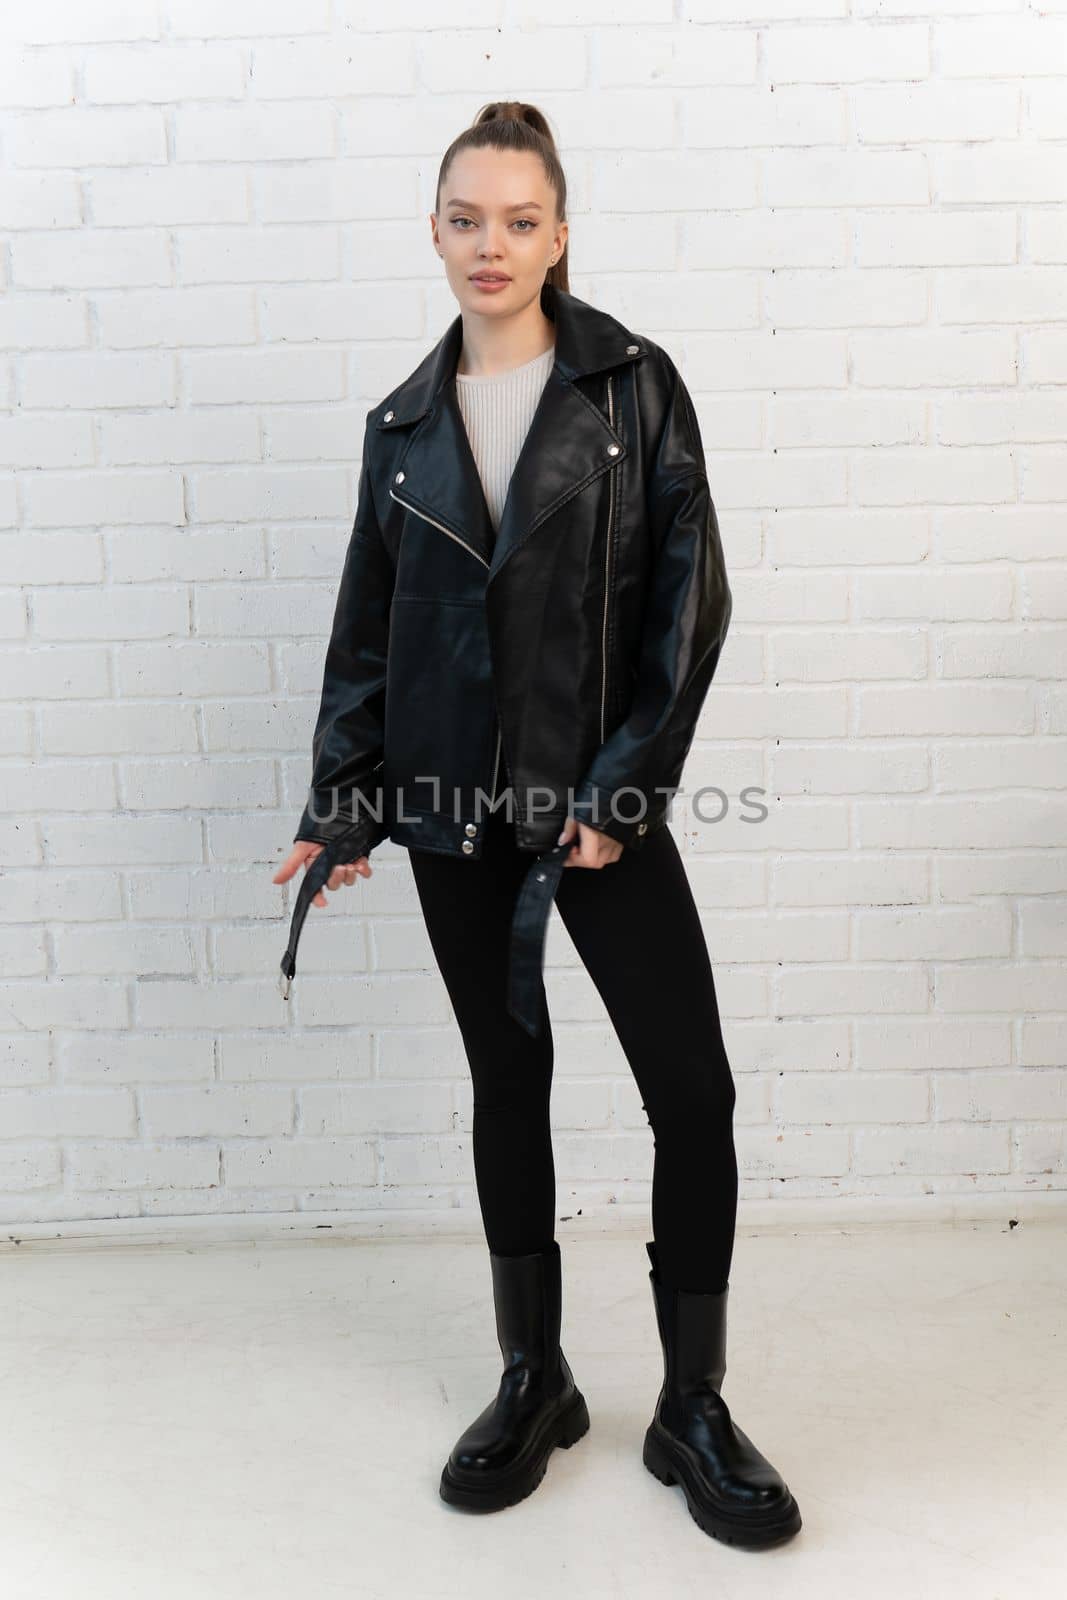 clothing style background design isolated casual jacket white zipper black leather fashion clothes by 89167702191